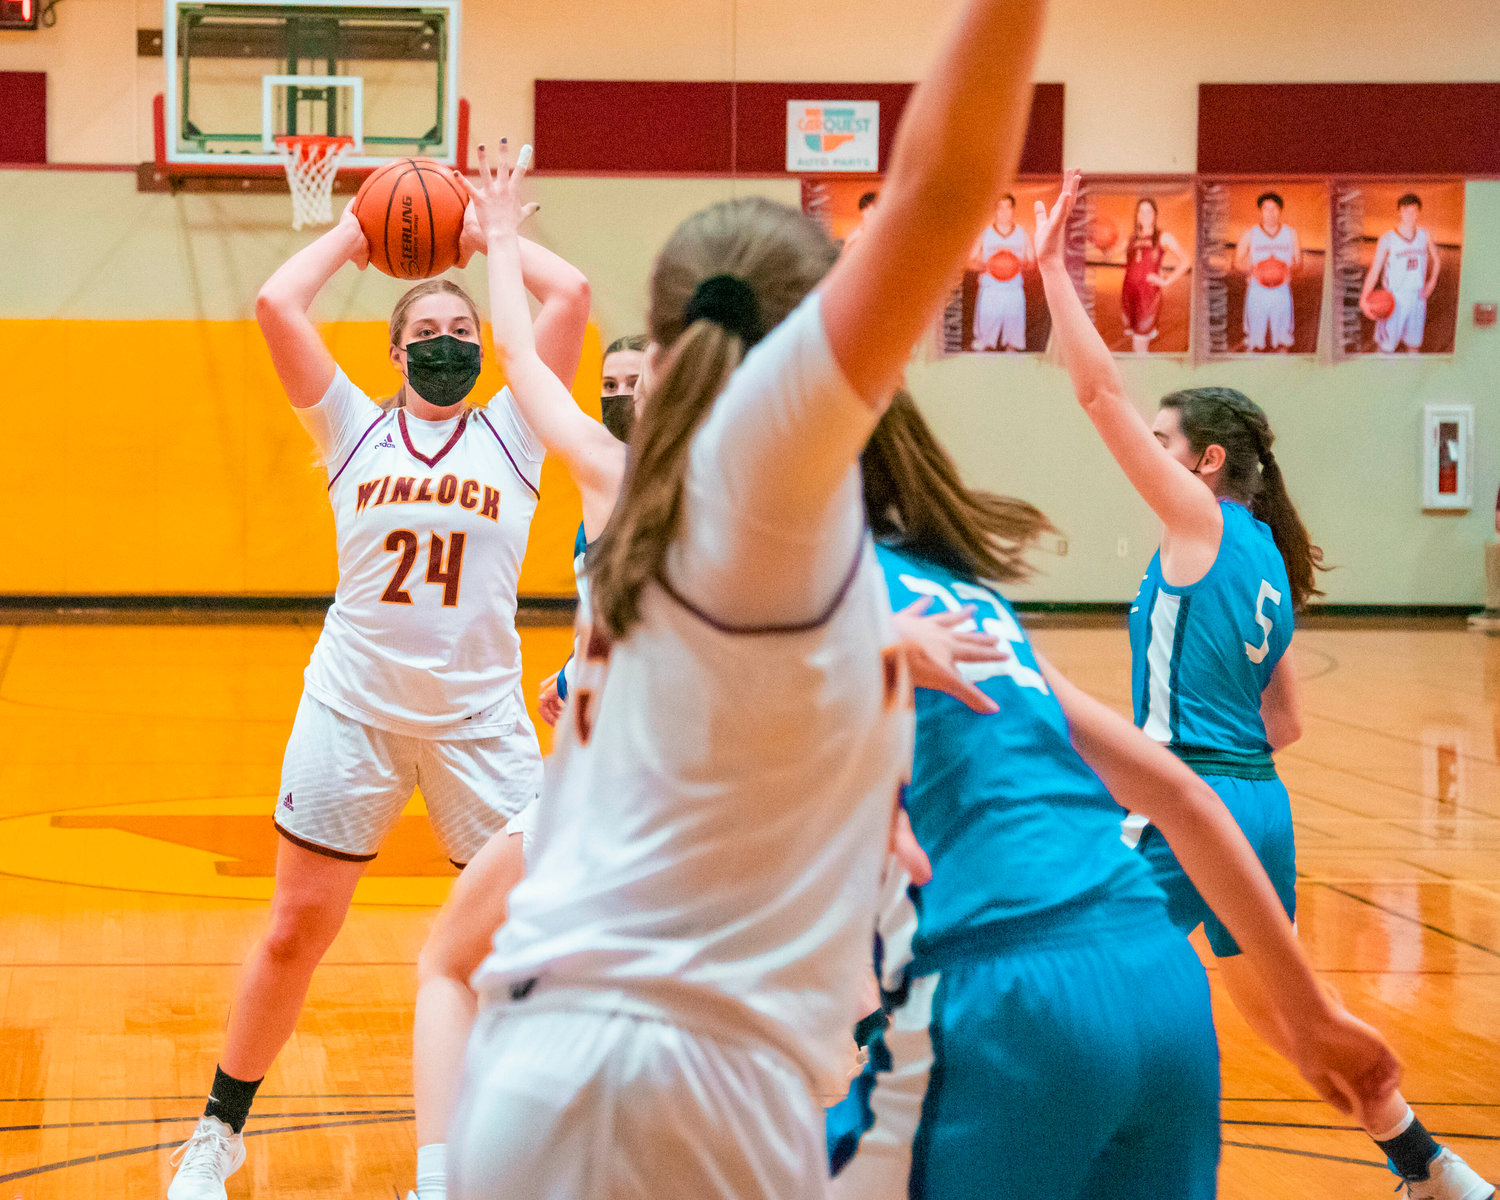 Winlock’s Addison Hall (24) looks to pass during a game on Thursday.